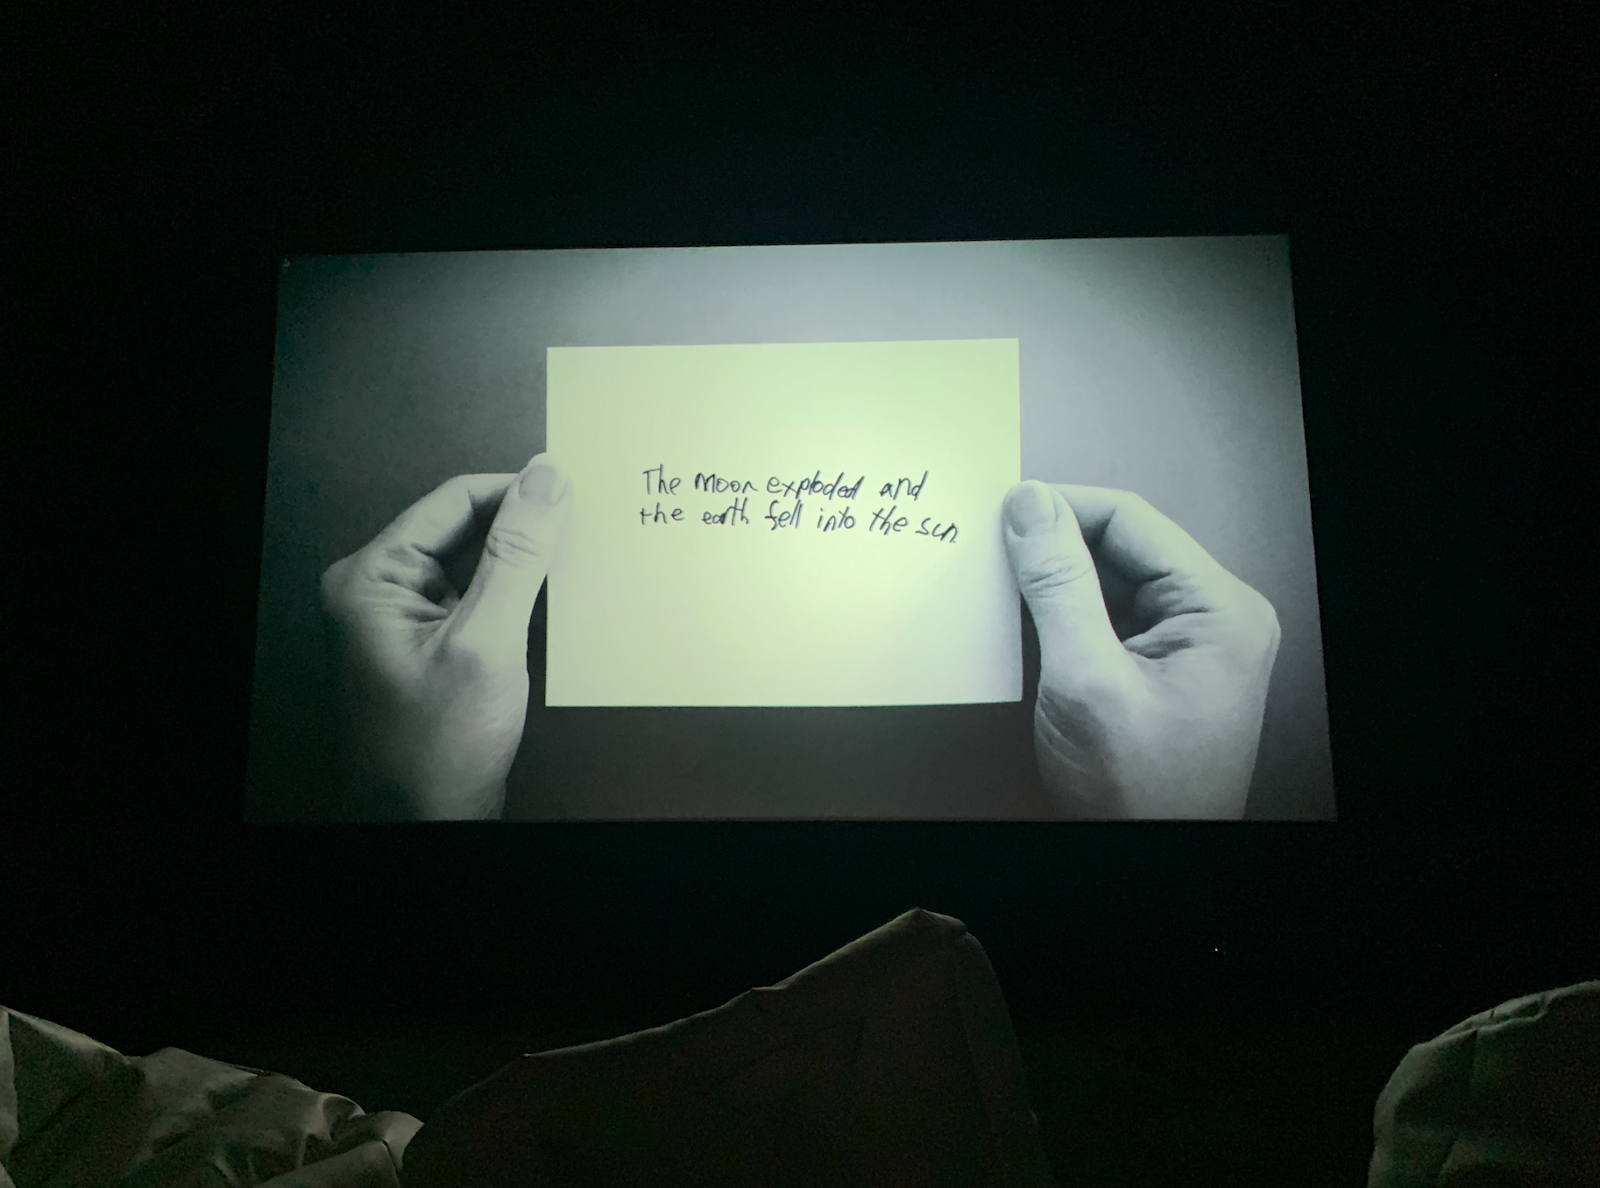 The exhibition, “The Nightly News II,” at the MSU Broad Art Museum on April 19, displays anonymous dreams via video, such as, “the moon extended and the earth fell into the sun.”